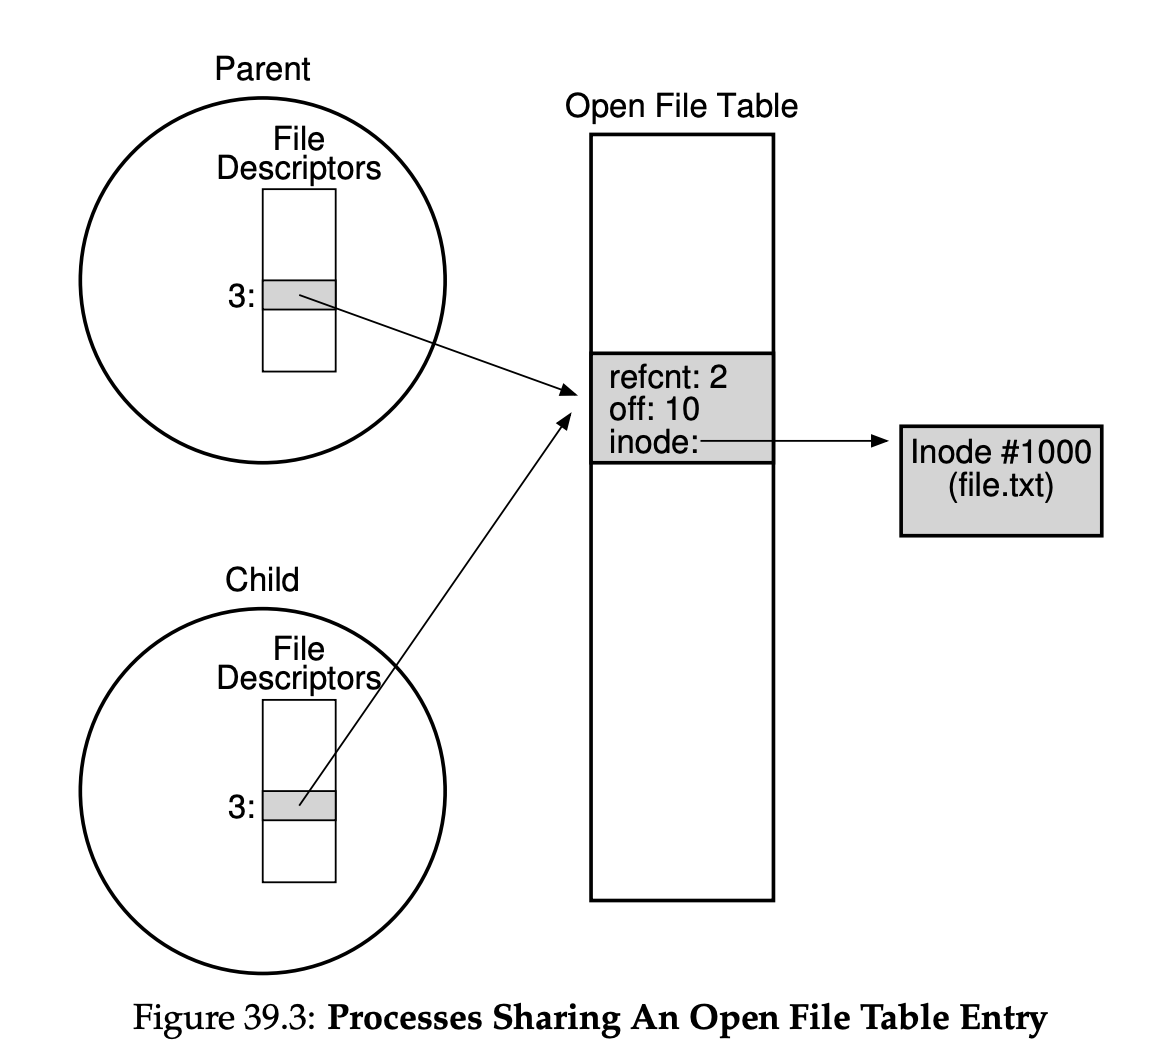 Open File Table